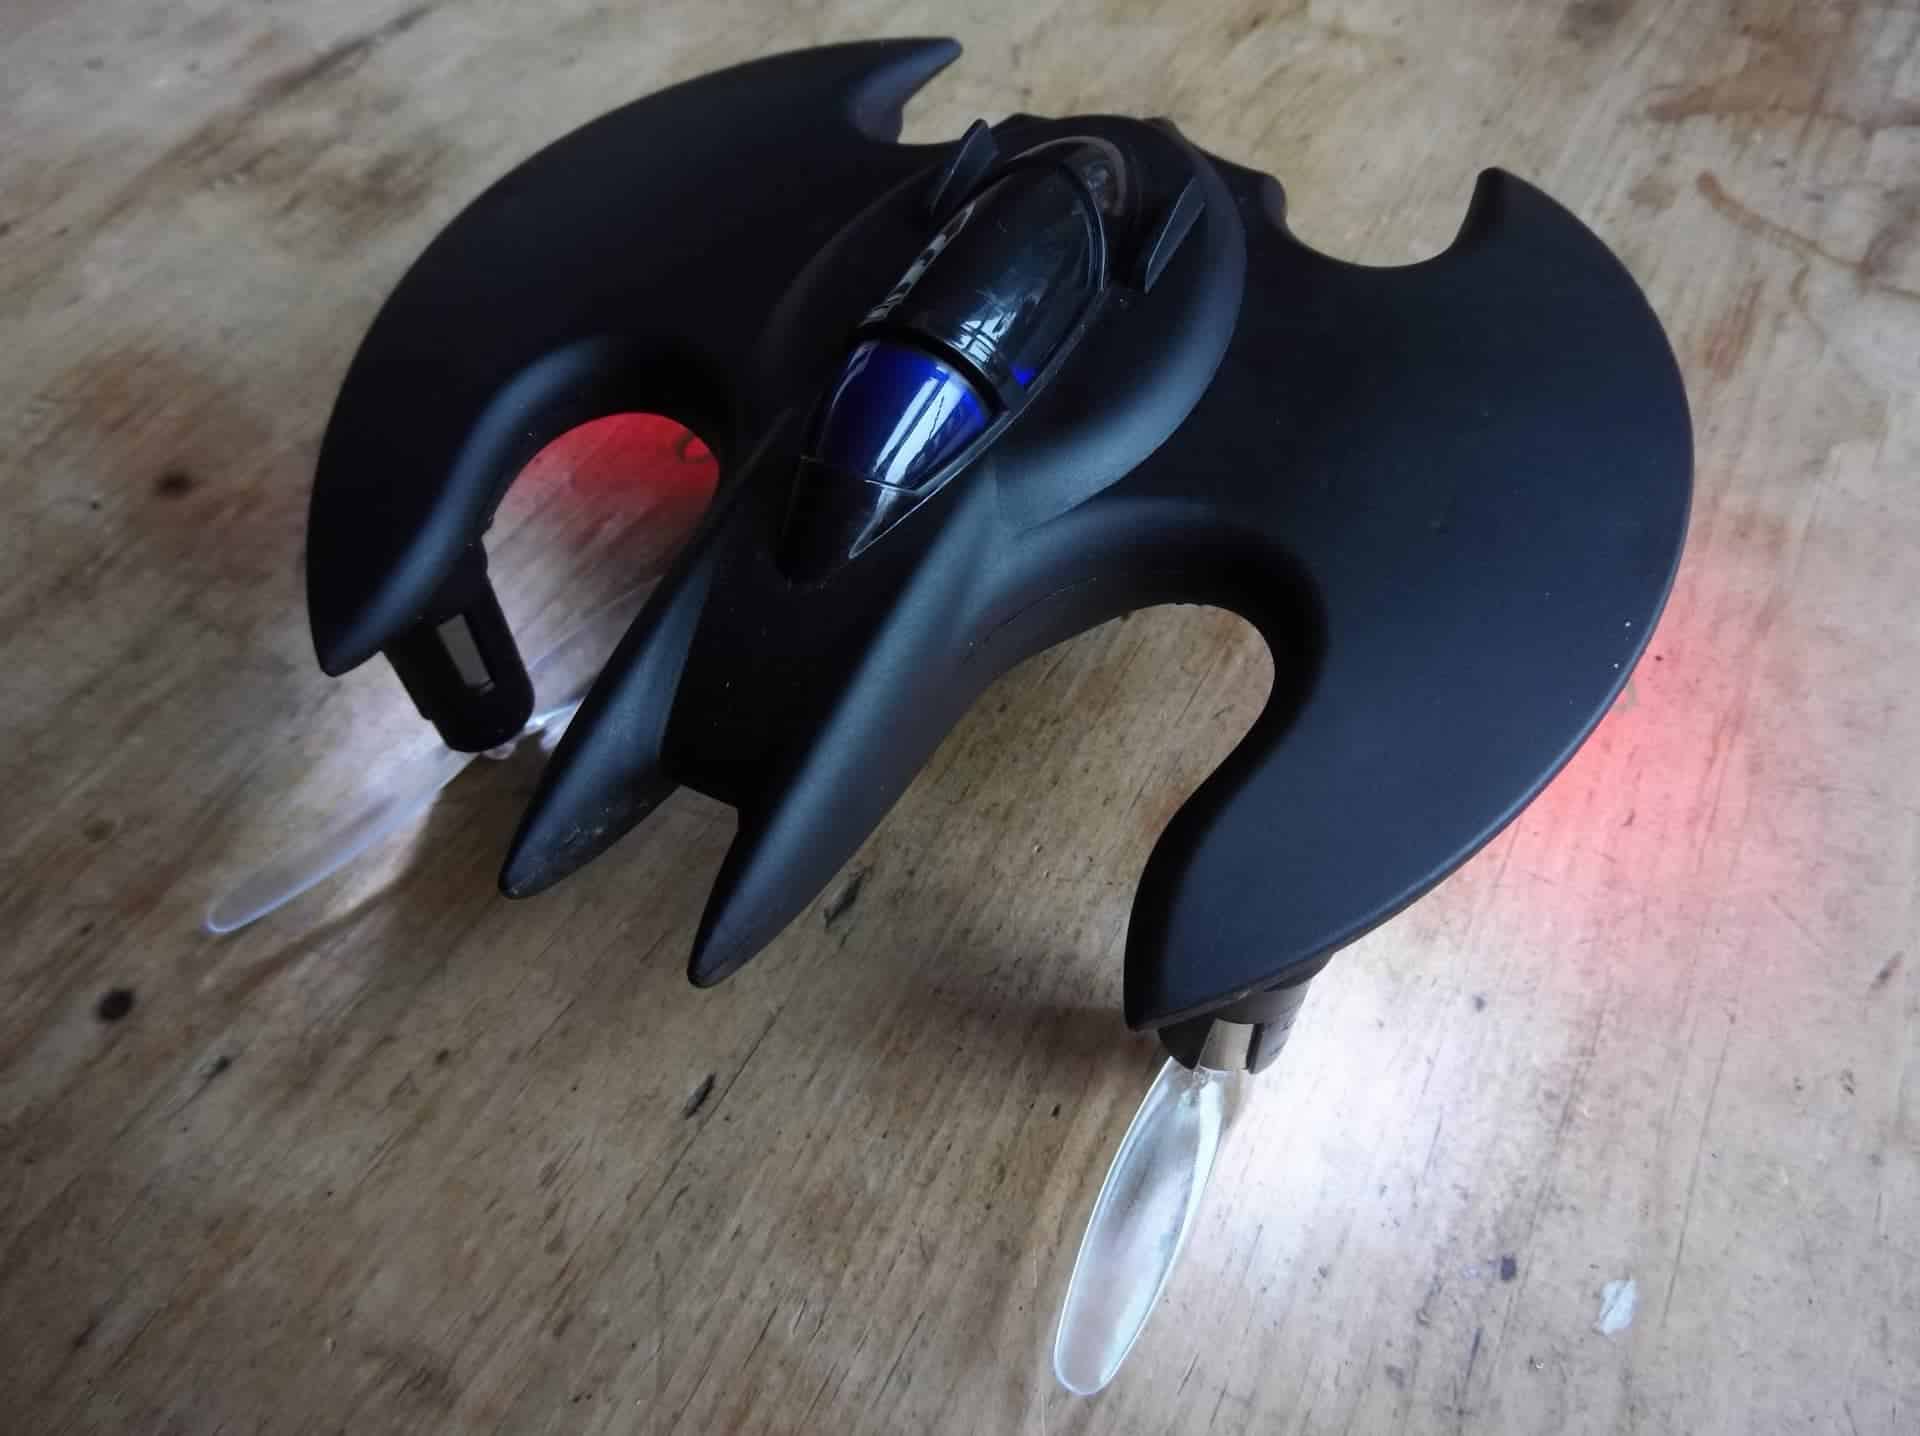 Batwing HD review: A fun £80 drone with a novel design